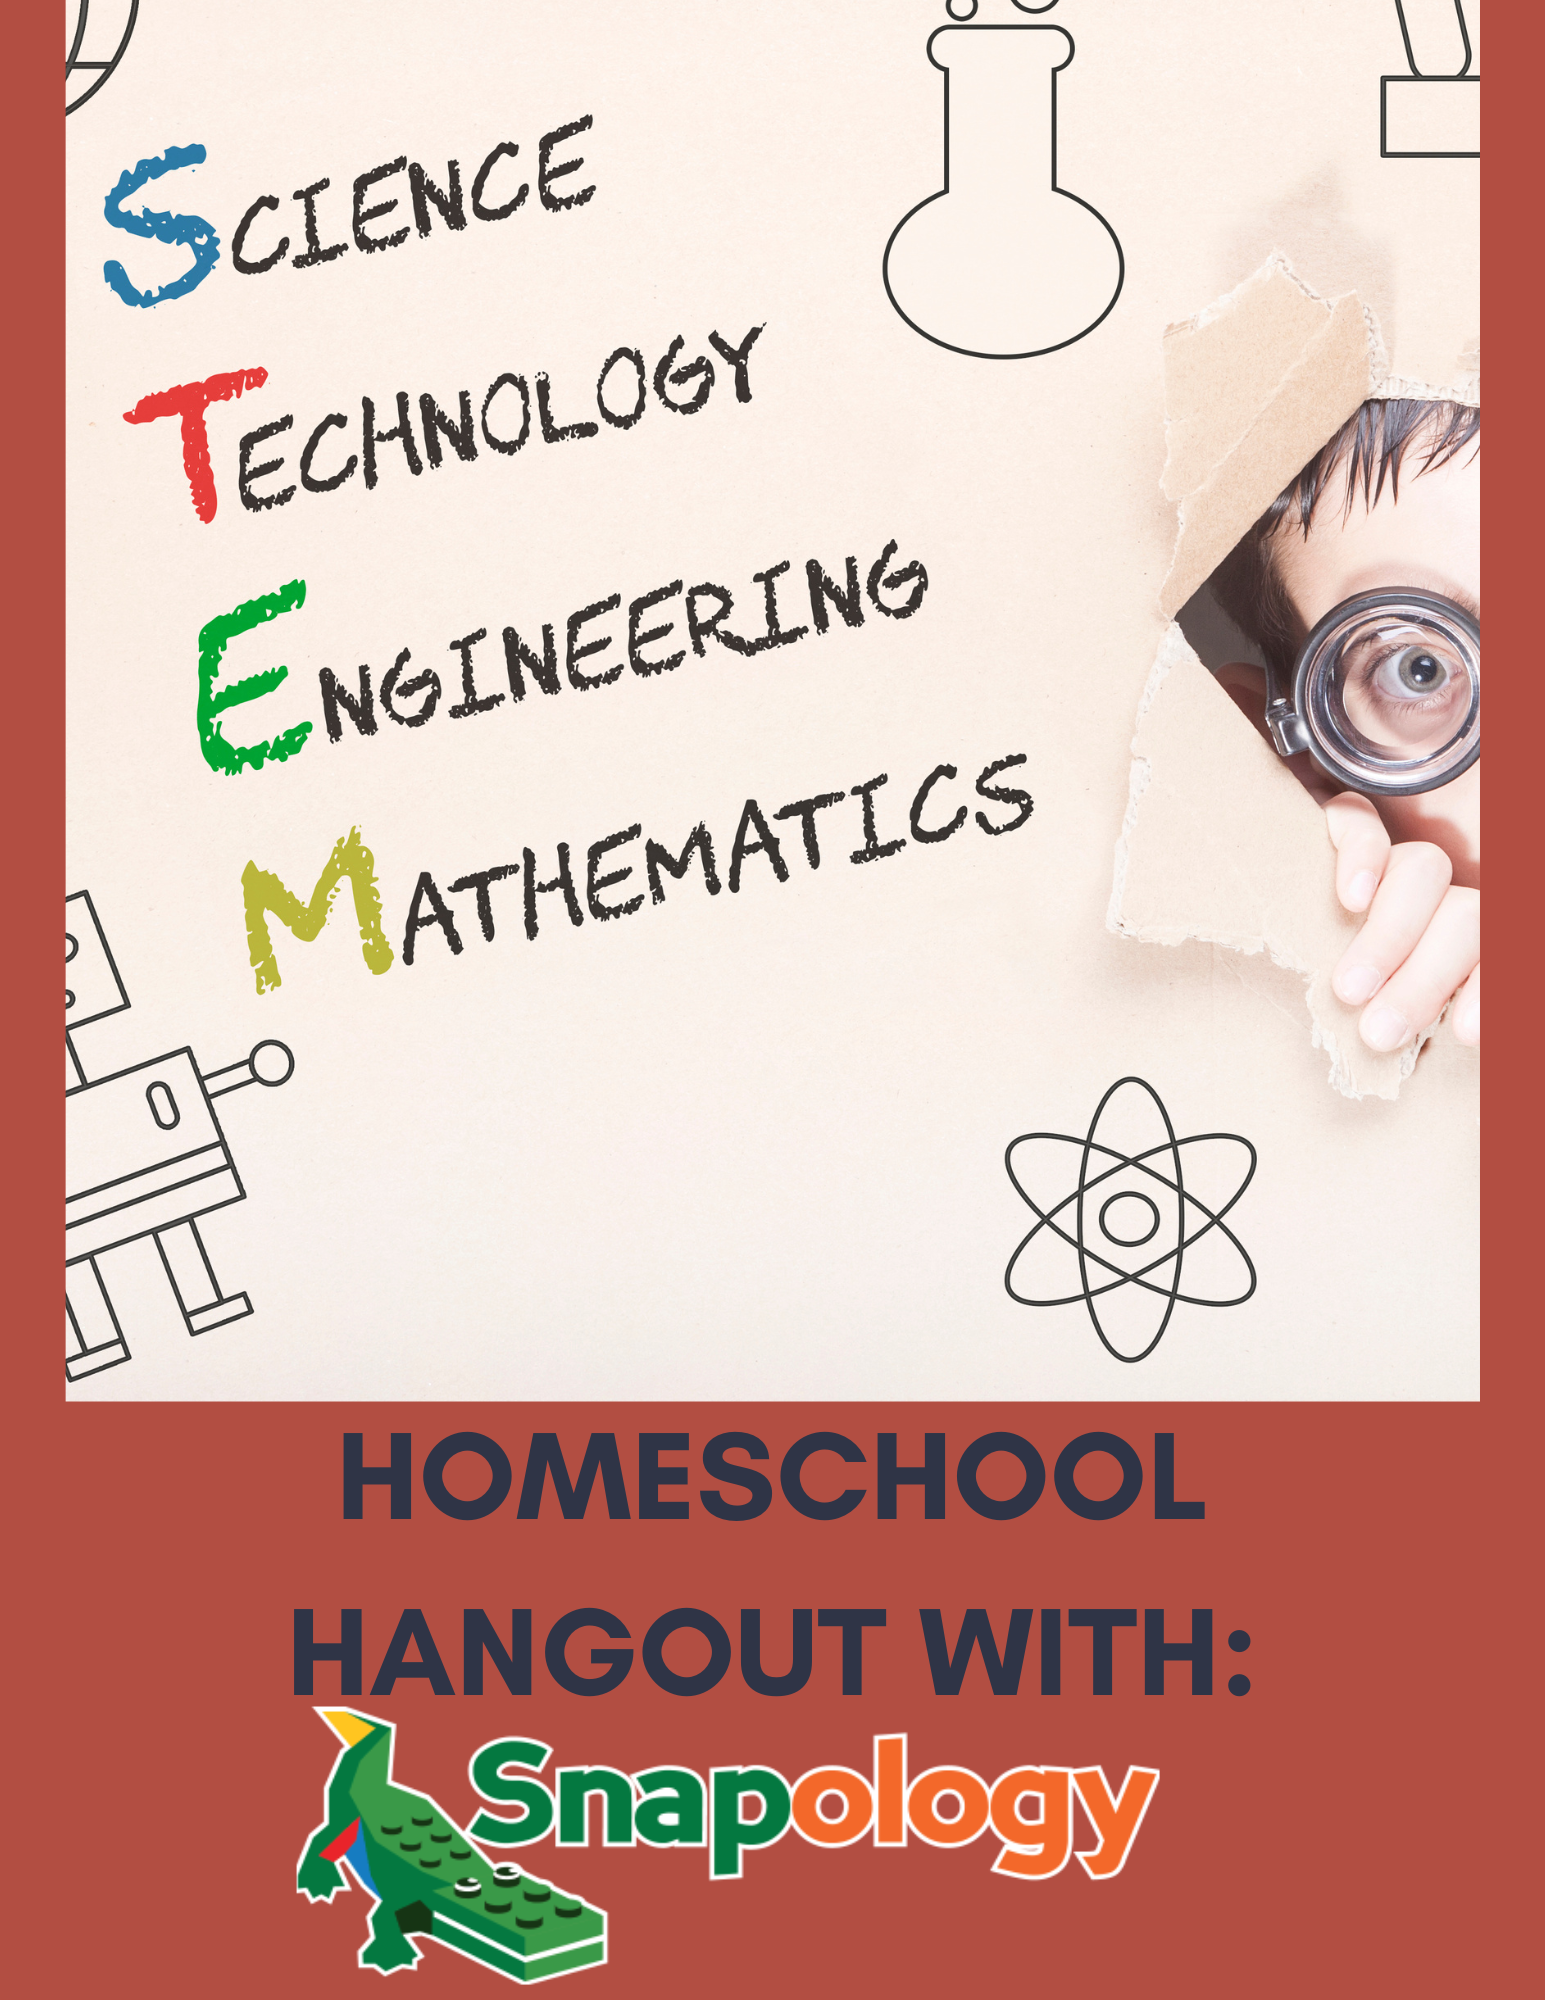 Science Technology Engineering Mathematics, Homeschool Hangout with Snapology.